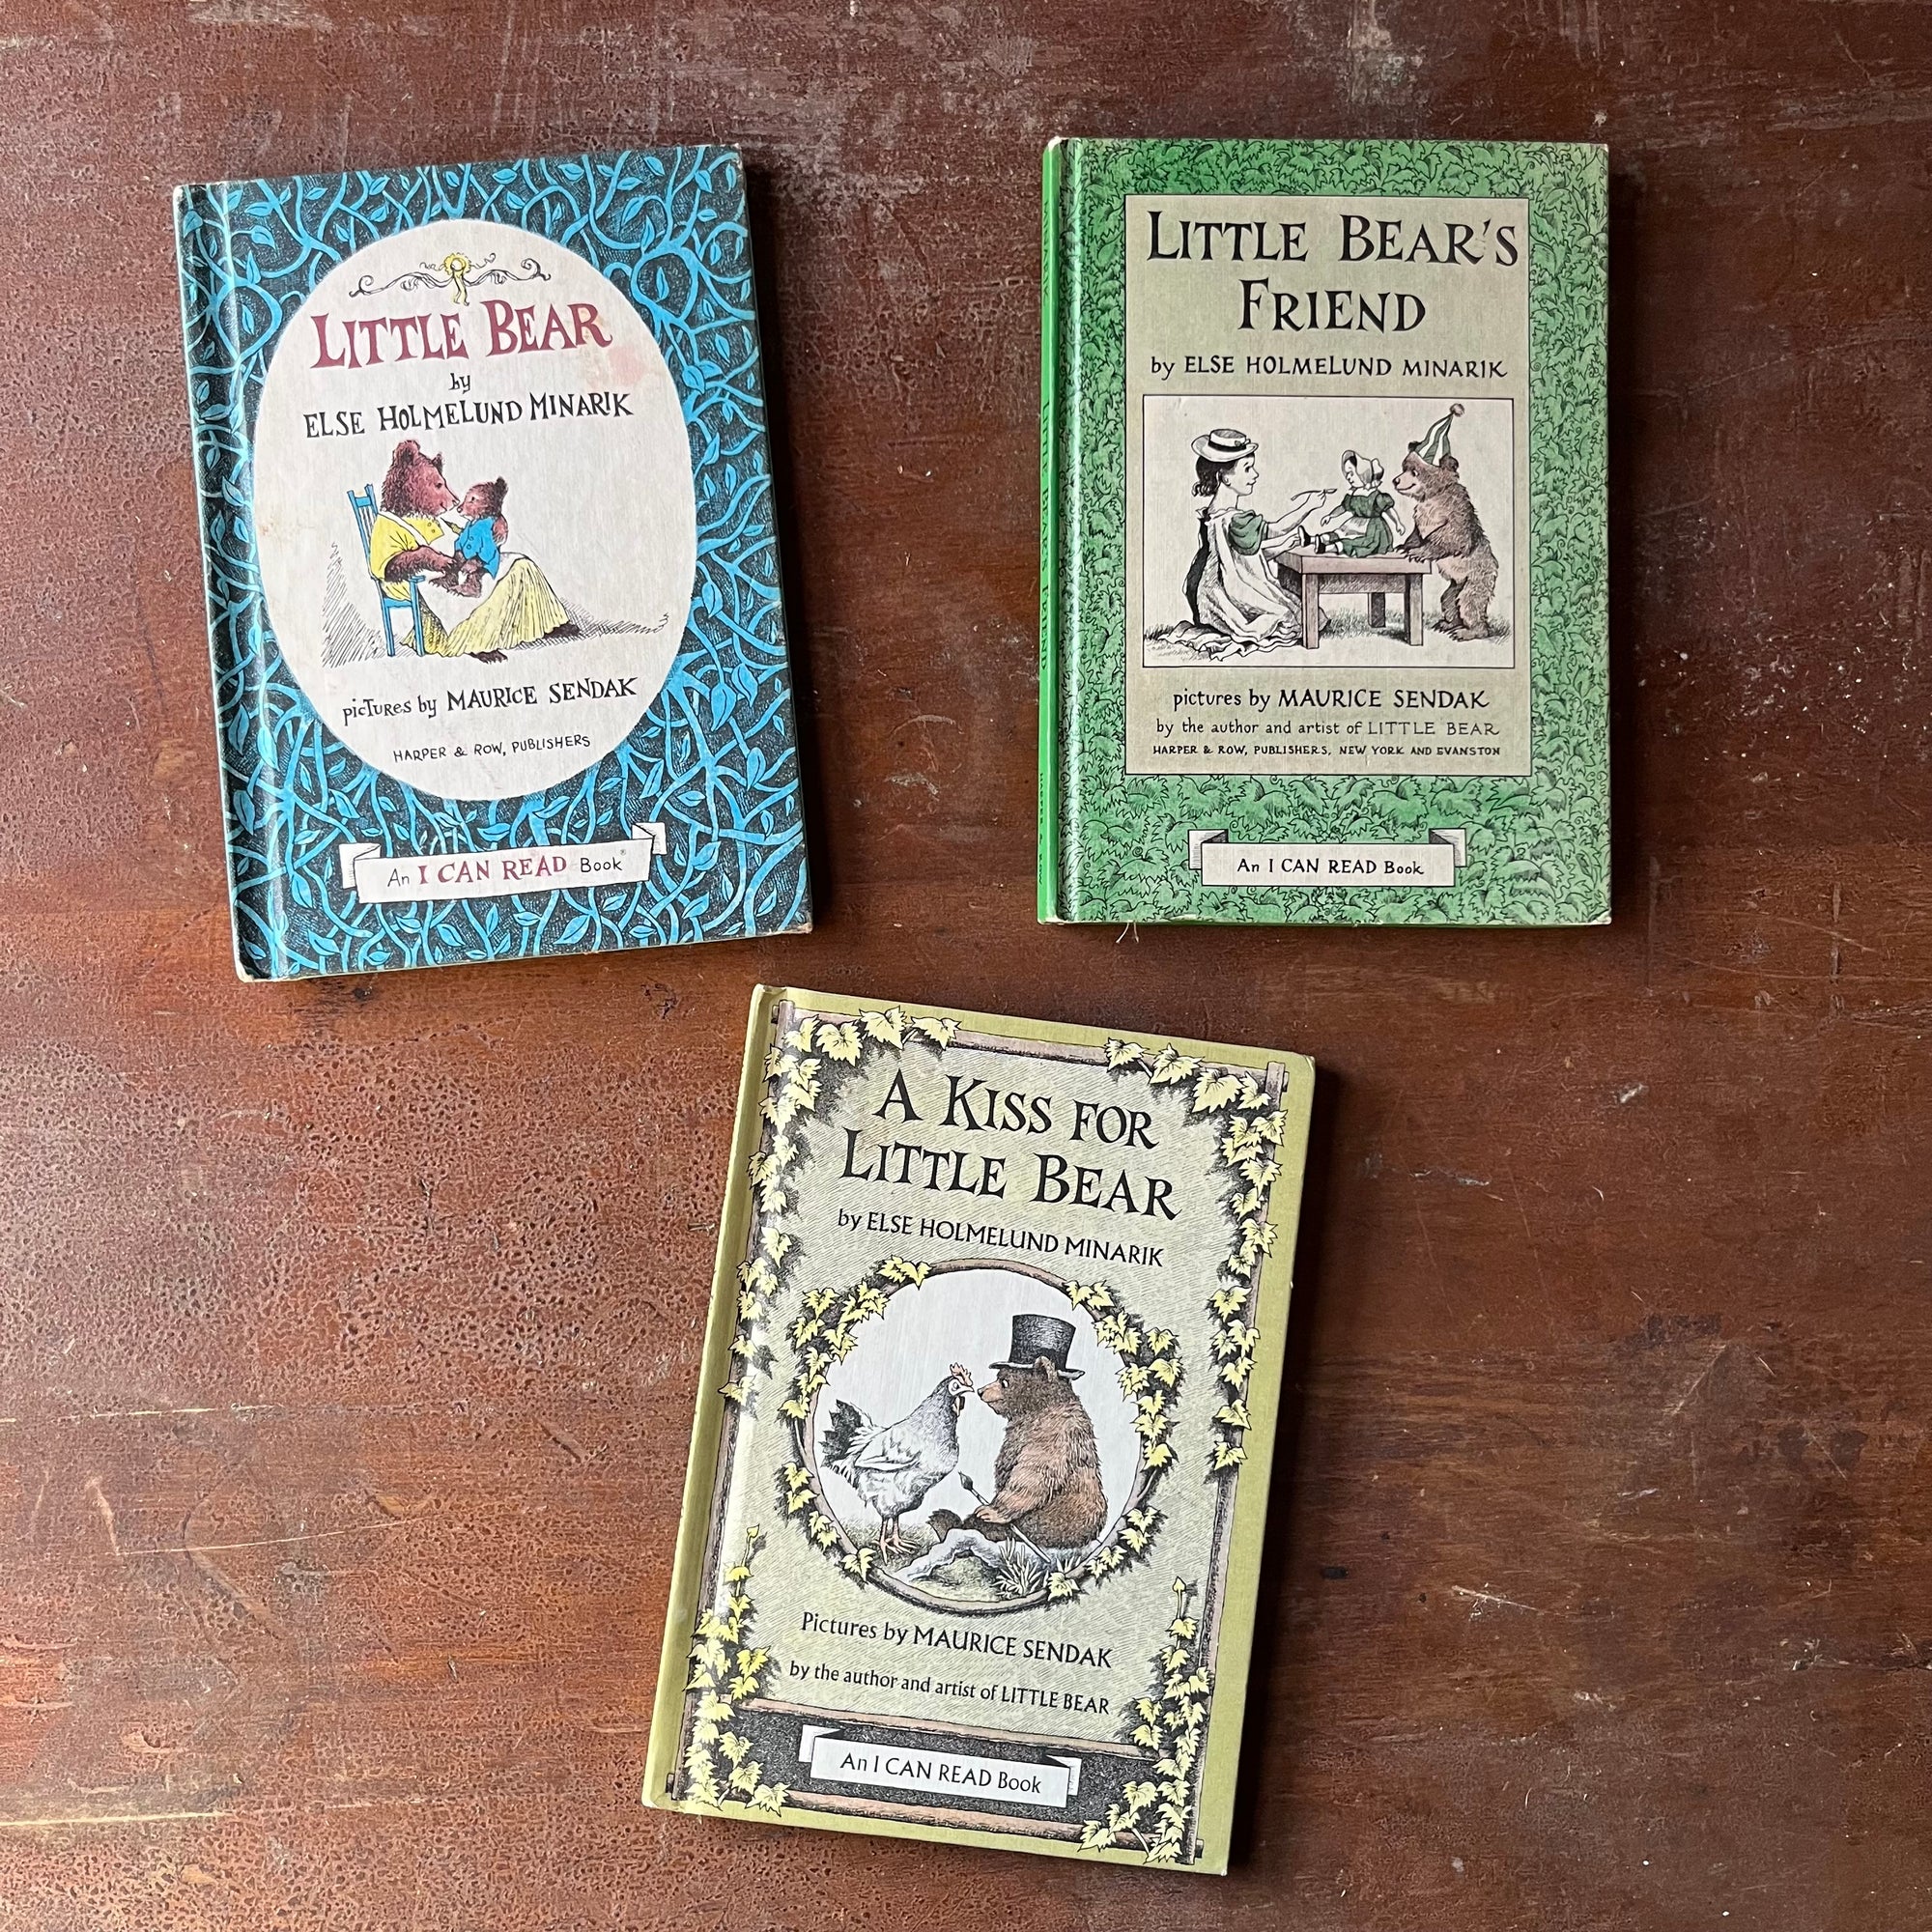 Little Bear Book Set by Elsie Holmelund Minarik with illustrations by Maurice Sendak-vintage children's picture books-view of the front covers with illustrations from each book